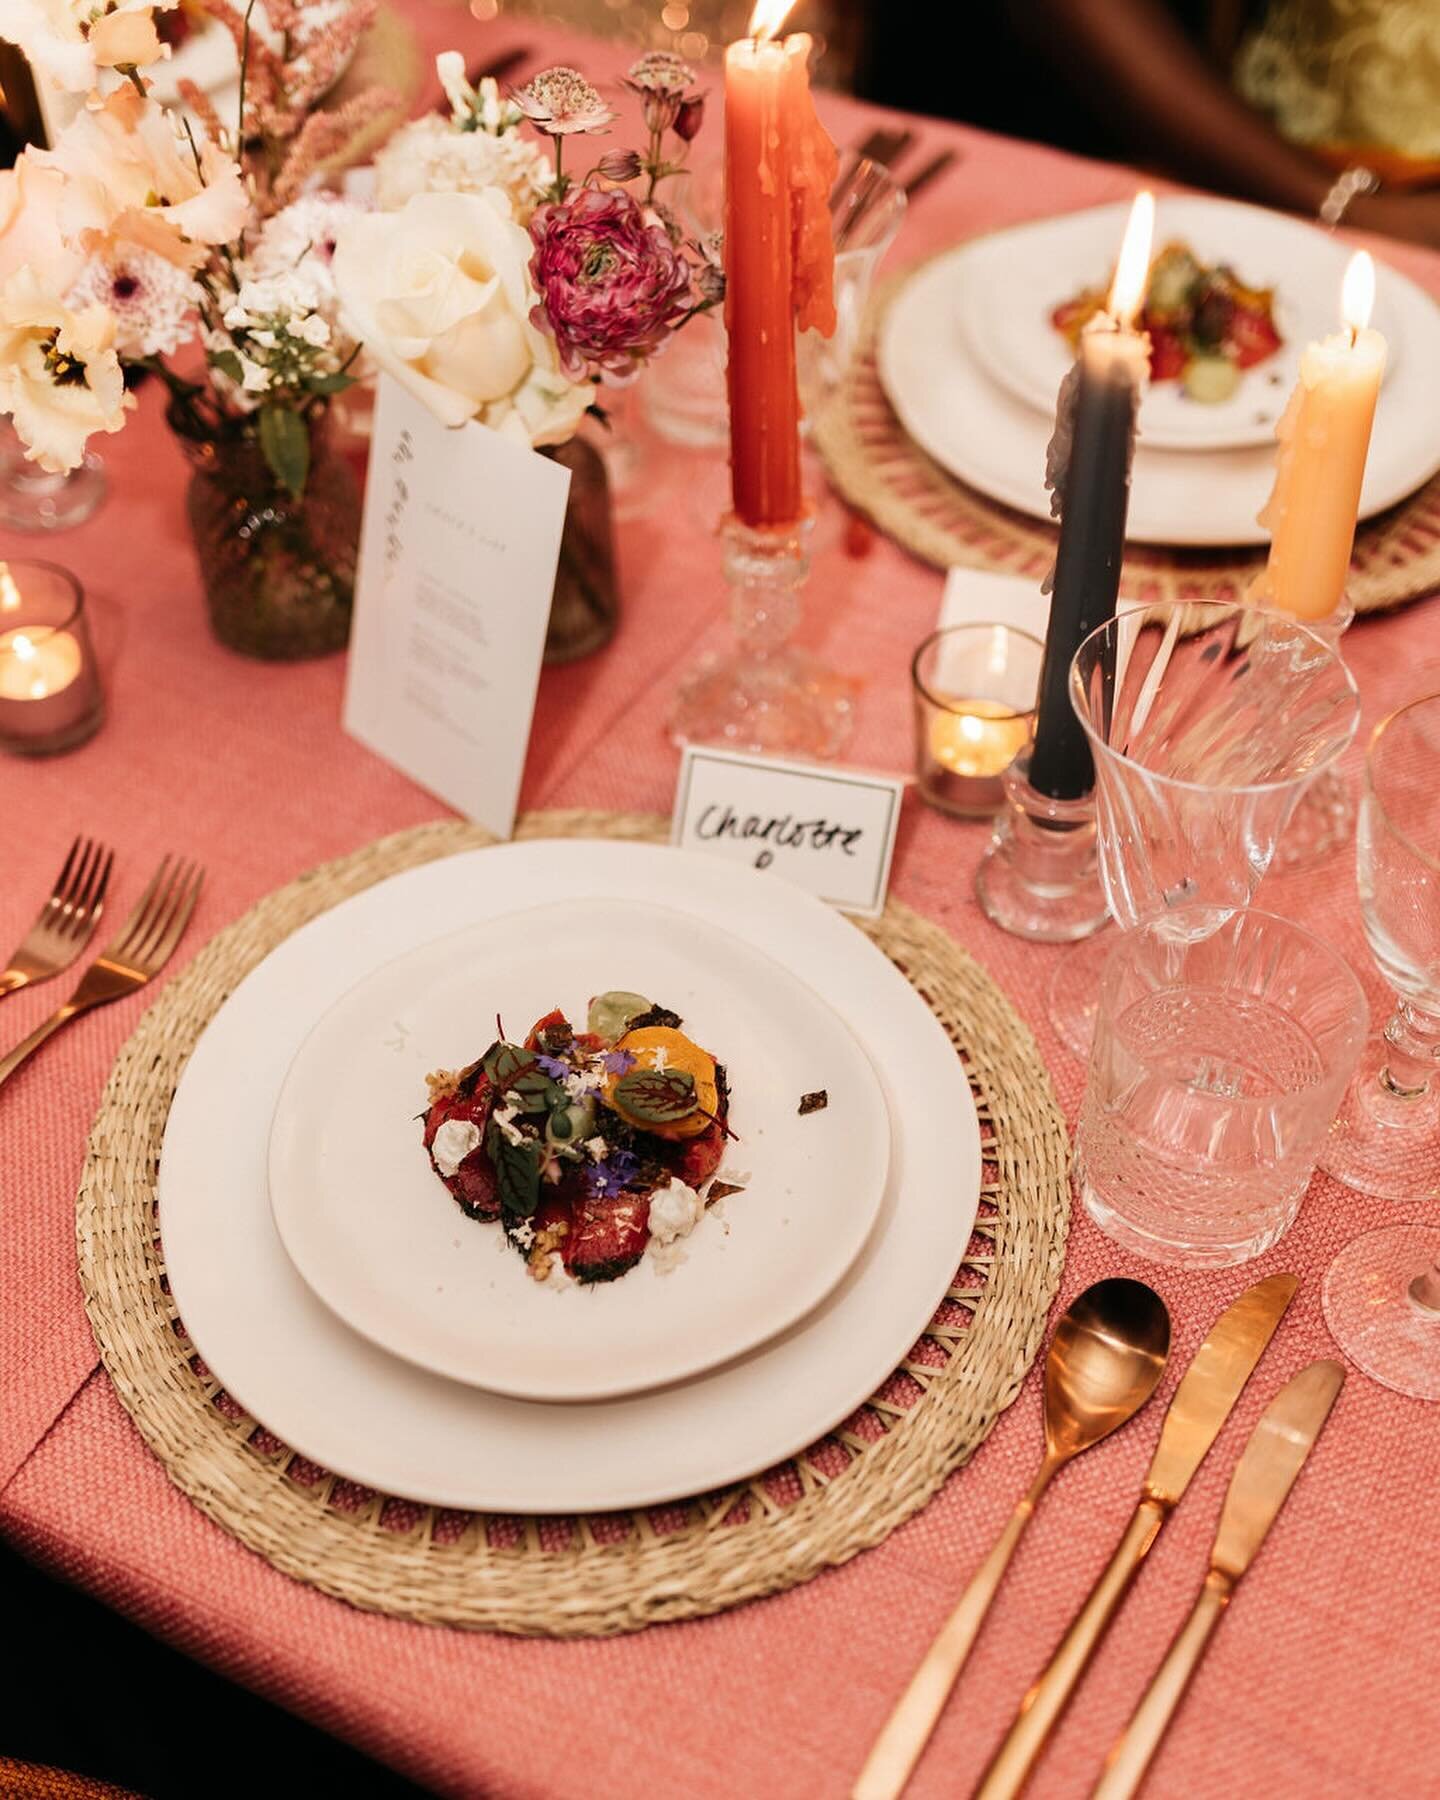 &amp; MORE gorgeous photos from a beautiful Dinner Party for Grace&rsquo;s 21st in Surrey

Planning / Styling / Catering @twomanycooks 
Photos @ameliaallenphotography 
Marquee @perfectpitchmarquees 
Bar / Cocktails @mixmastersuk 
Flowers @jasmineandj